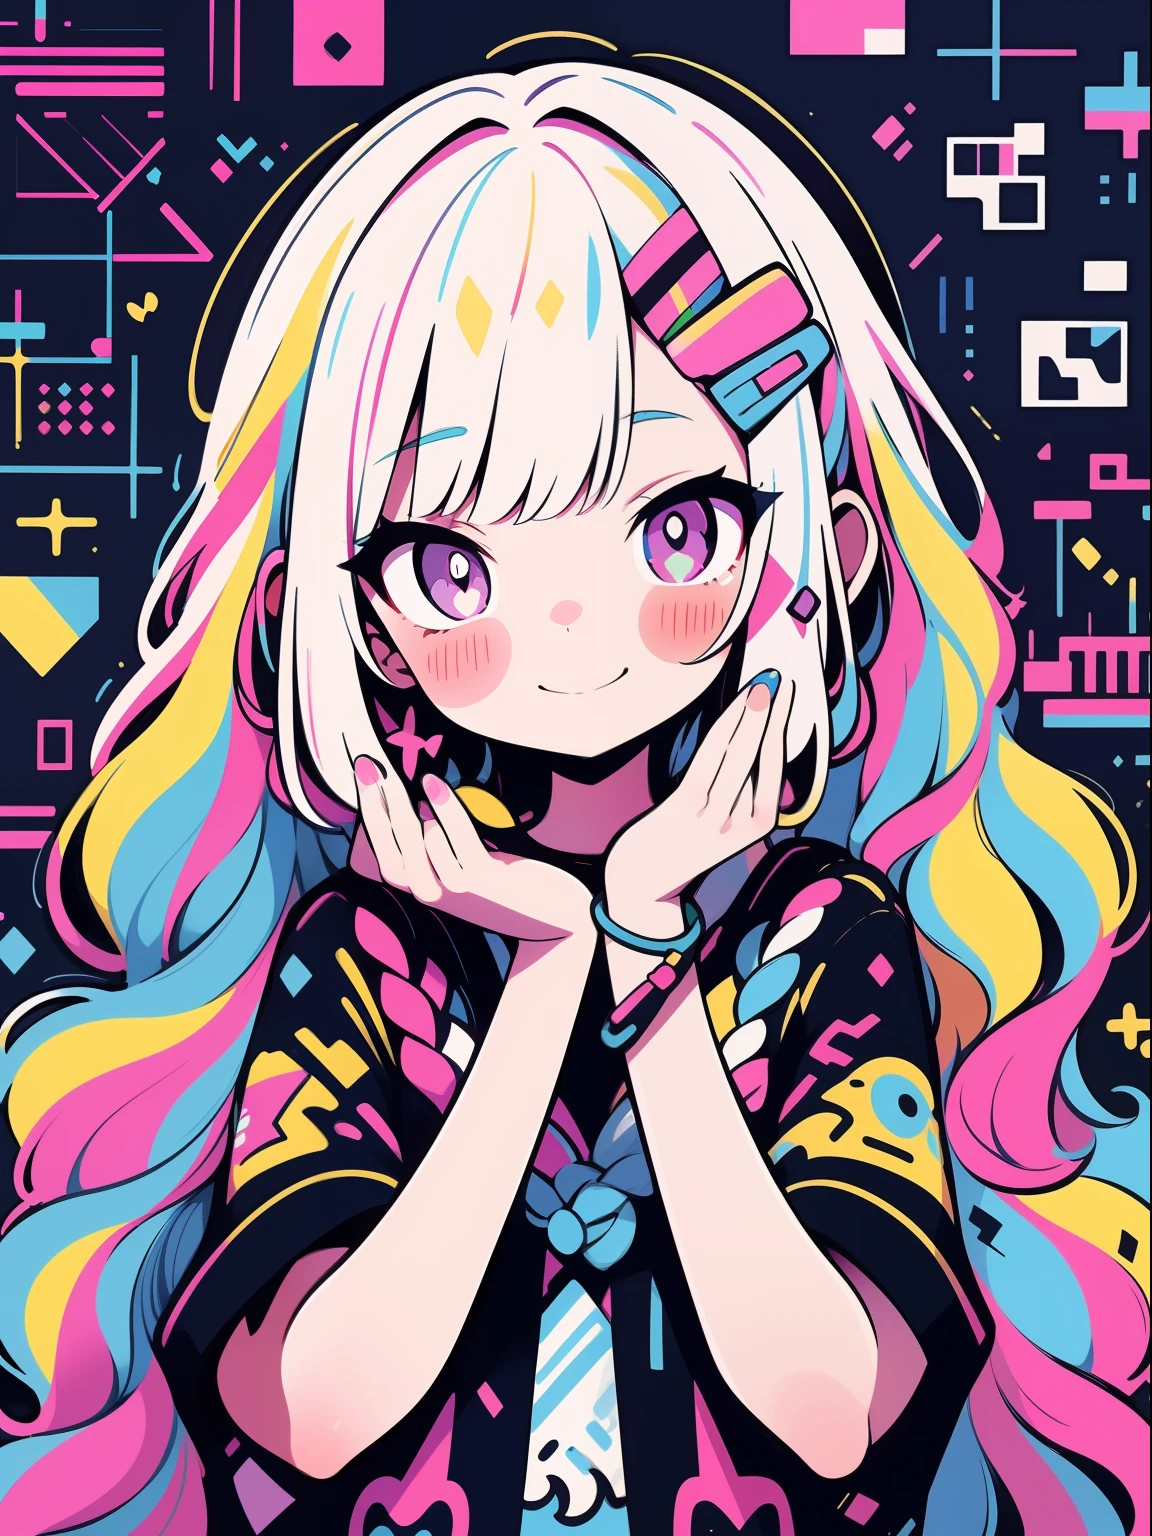 hightquality、Colorful color palette、high-level image quality、Kawaii Girl、Unprecedented amount of drawing、anime styled、Geometric pattern background、sticker style、Long hair、light pink hair、purple eyes, drill hair, front facing, hands up